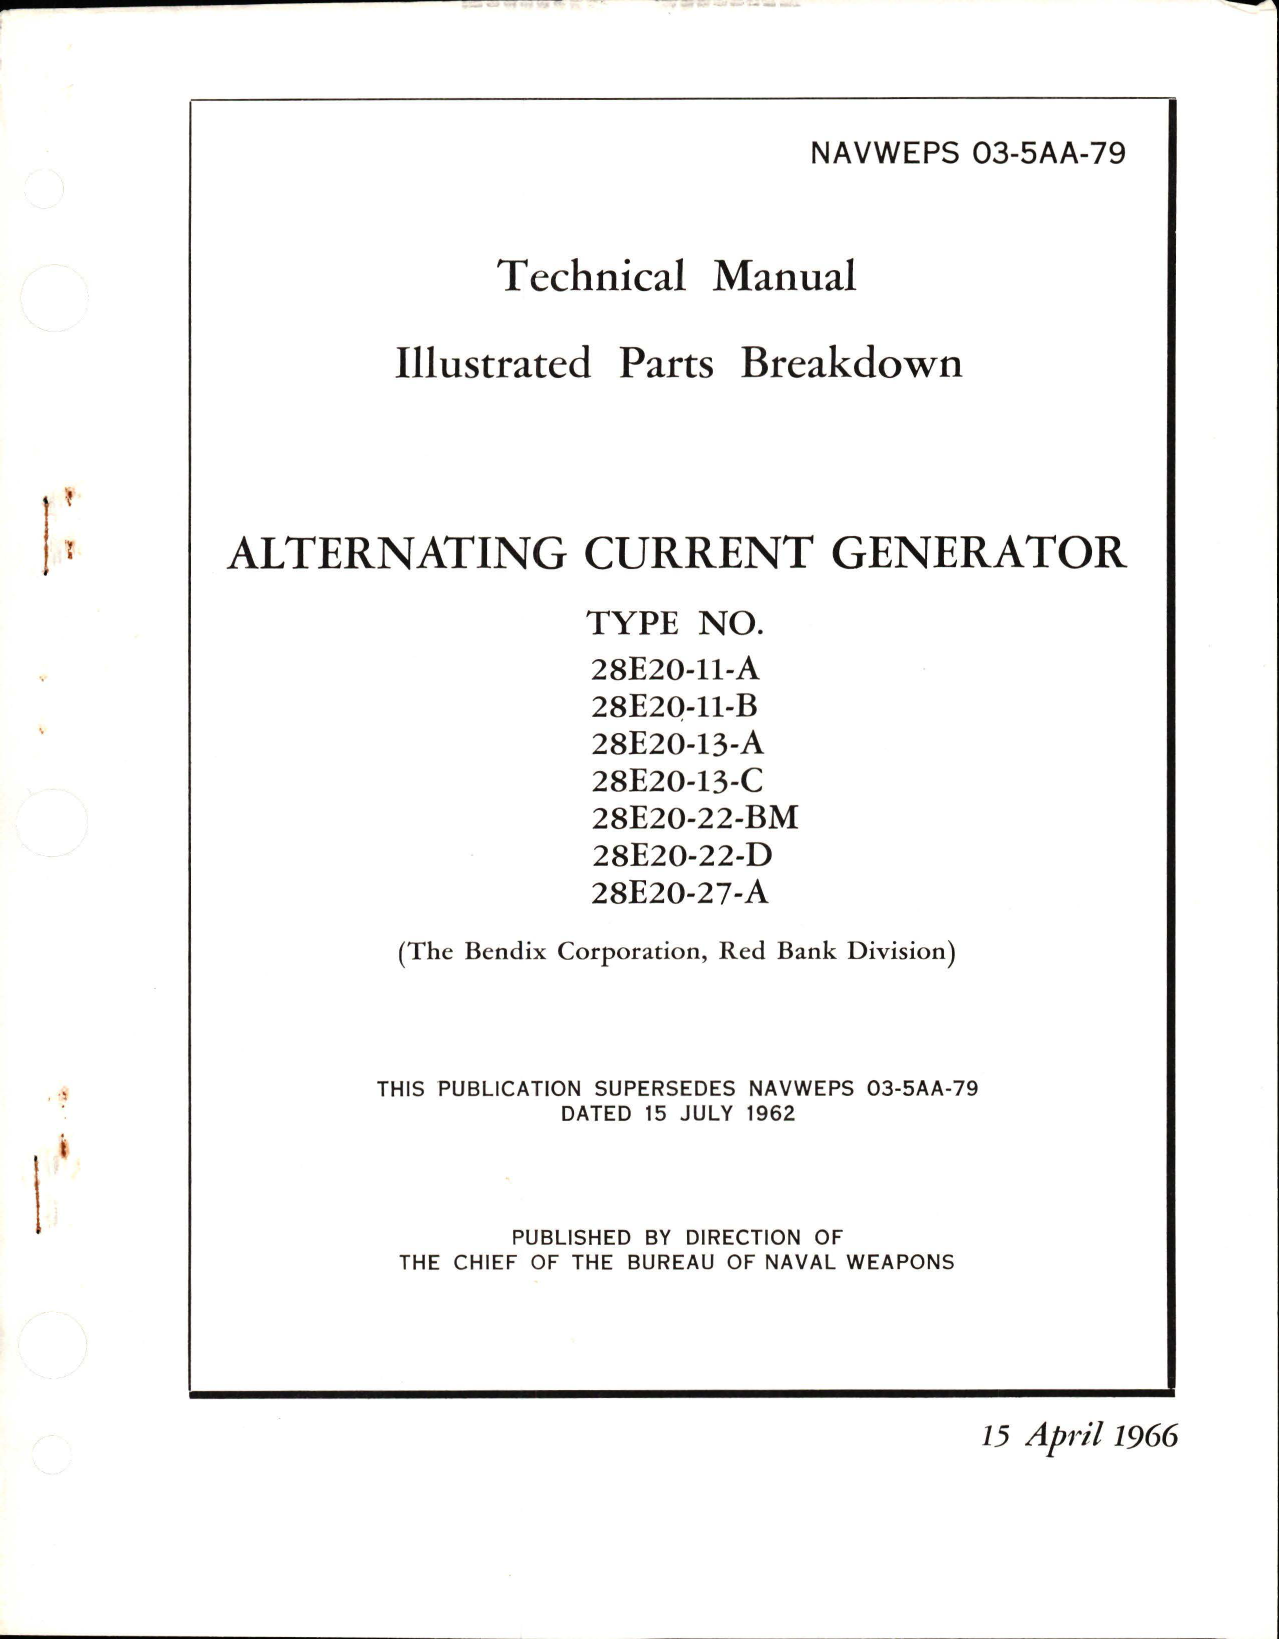 Sample page 1 from AirCorps Library document: Illustrated Parts Breakdown for Alternating Current Generator